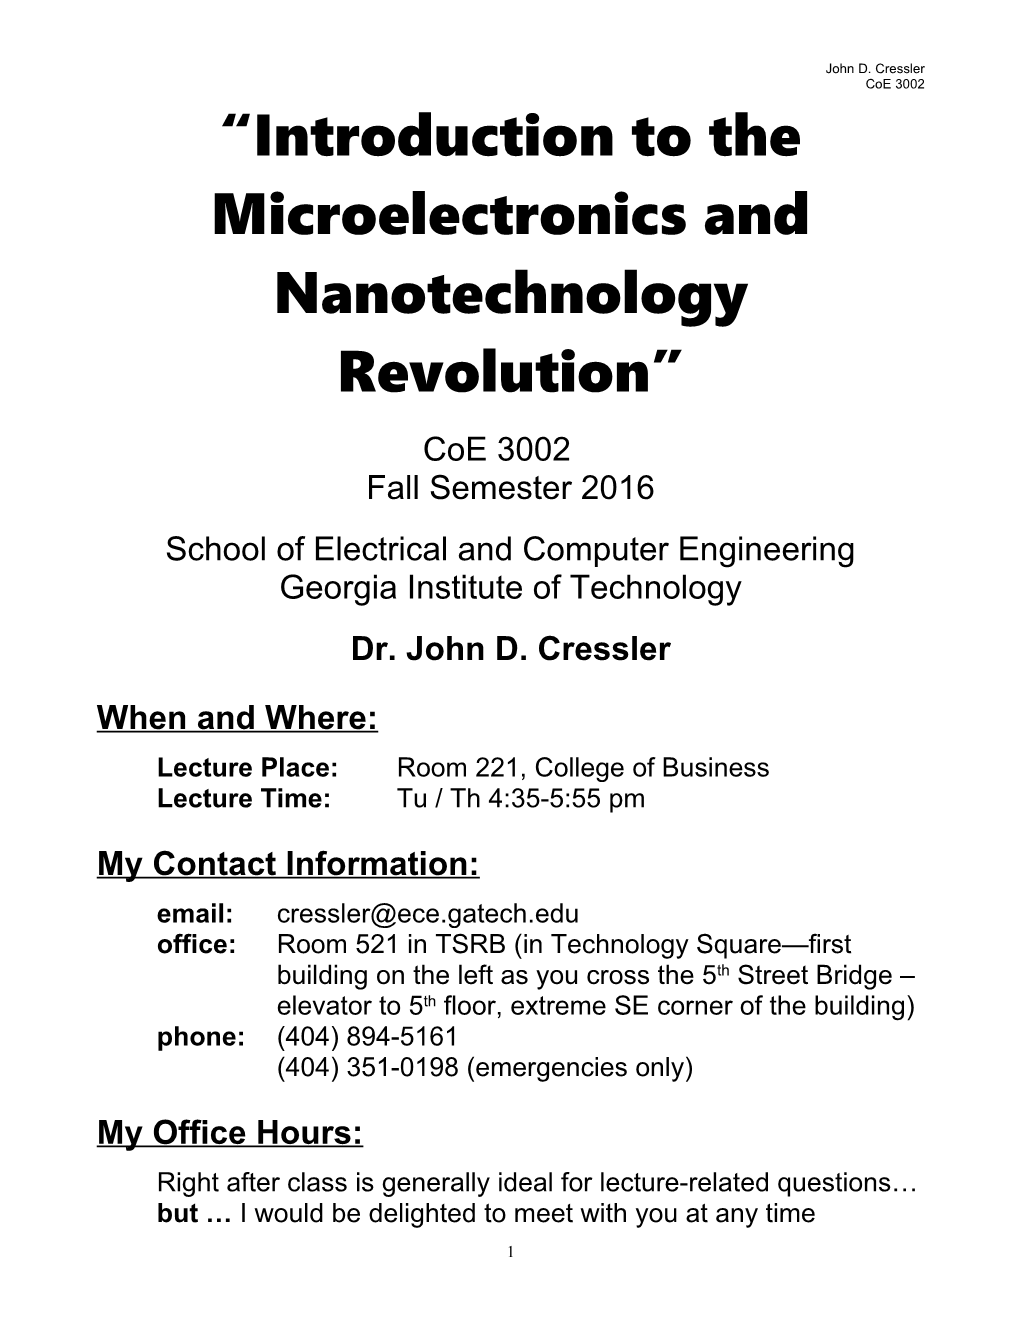 Introductionto the Microelectronics and Nanotechnology Revolution